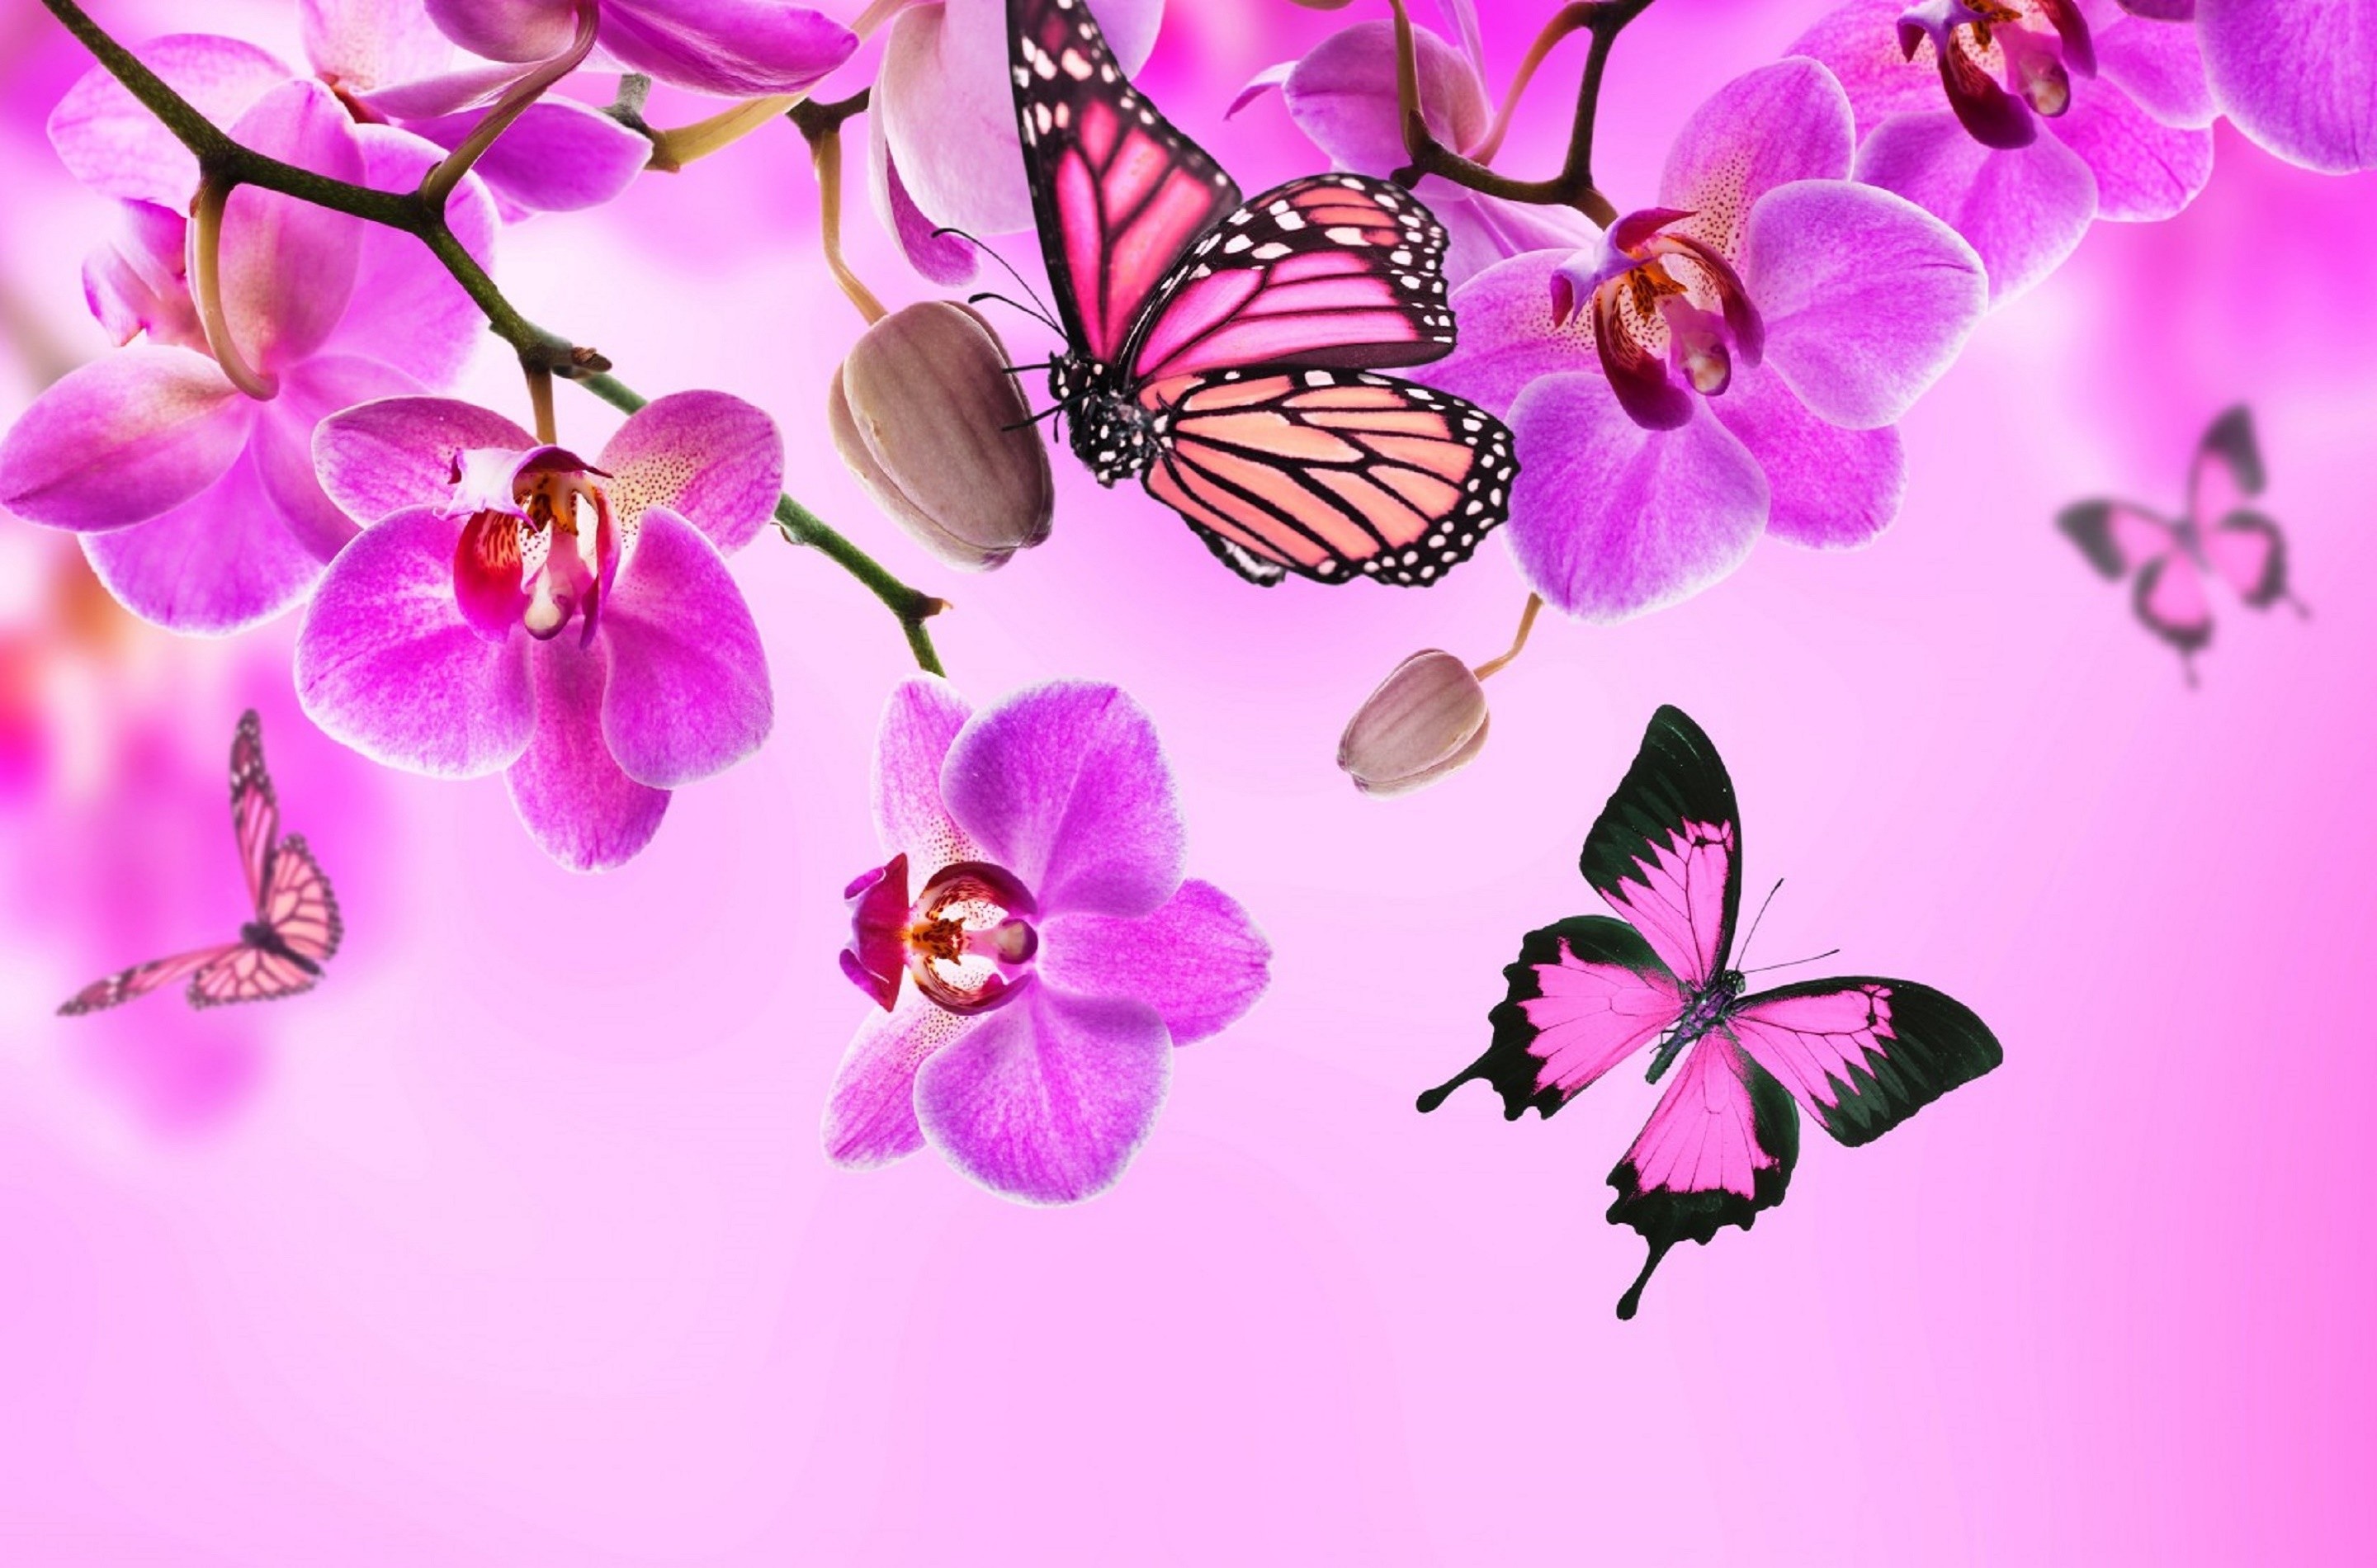 Butterfly Wallpaper Images  Free Download on Freepik